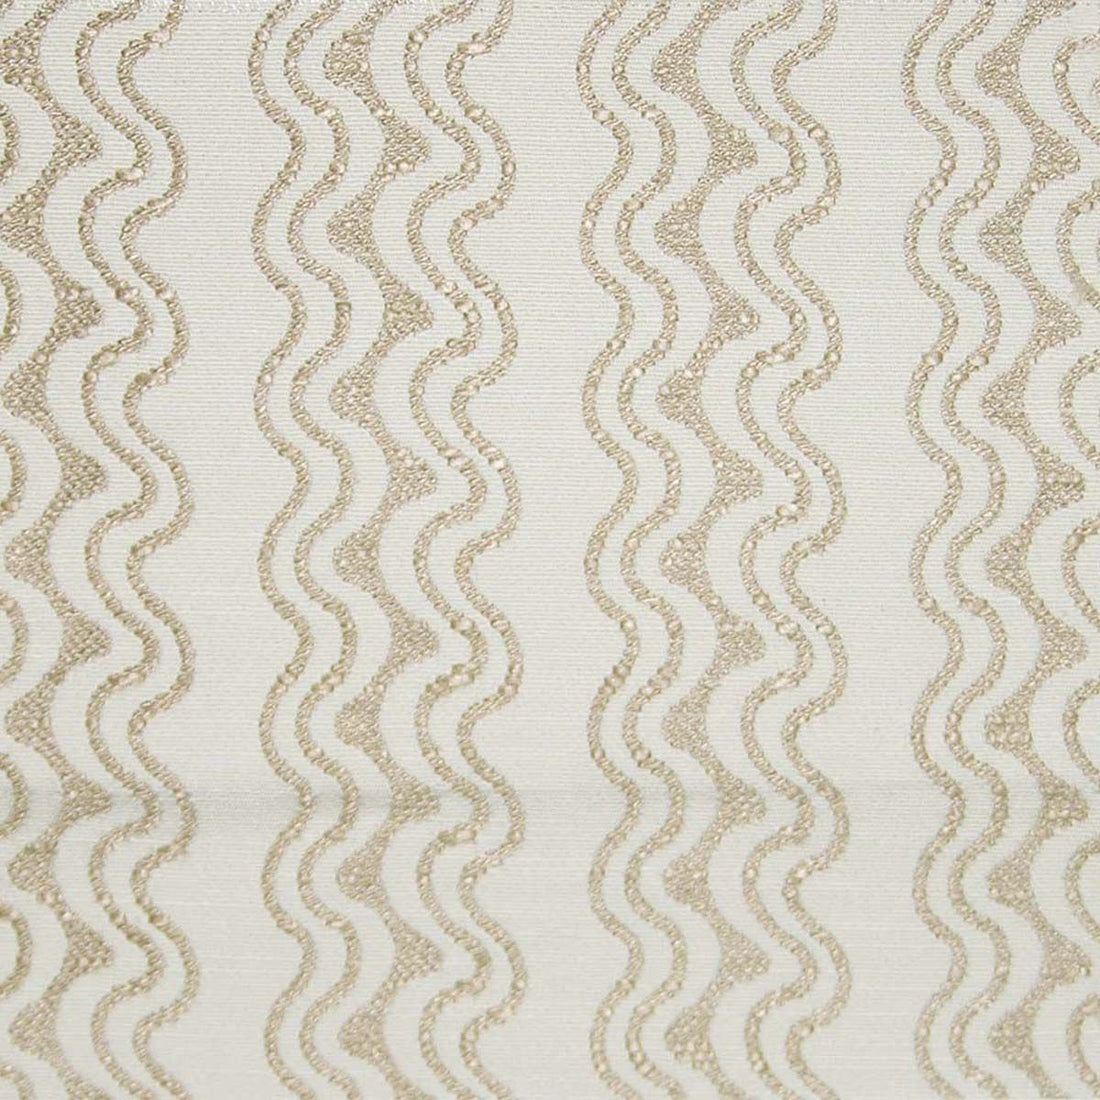 Clearwater fabric in sand color - pattern number RA 00018616 - by Scalamandre in the Old World Weavers collection